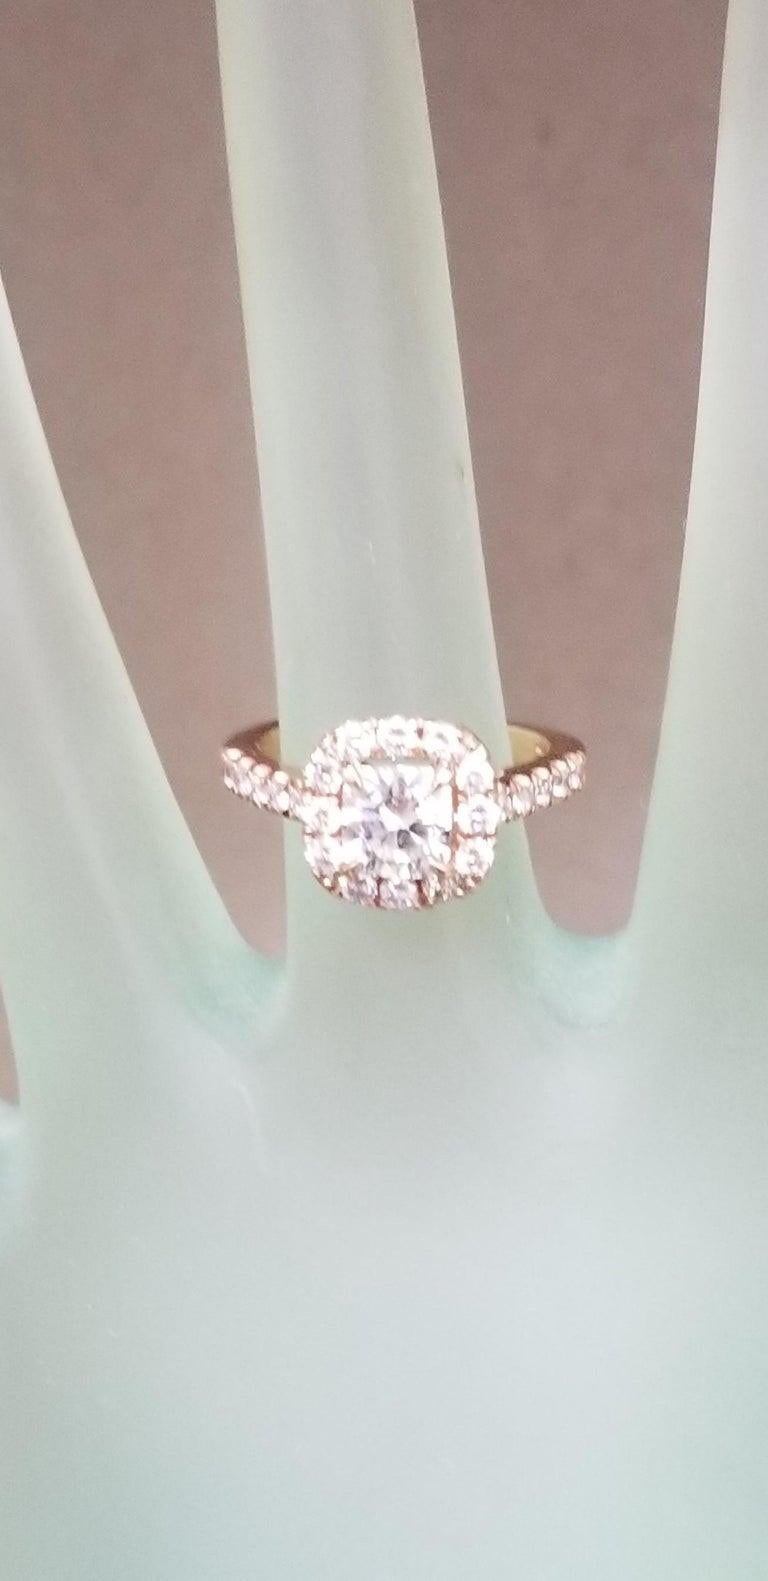 Radiant Cut .97 Carat Radiant Diamond in Halo Ring For Sale